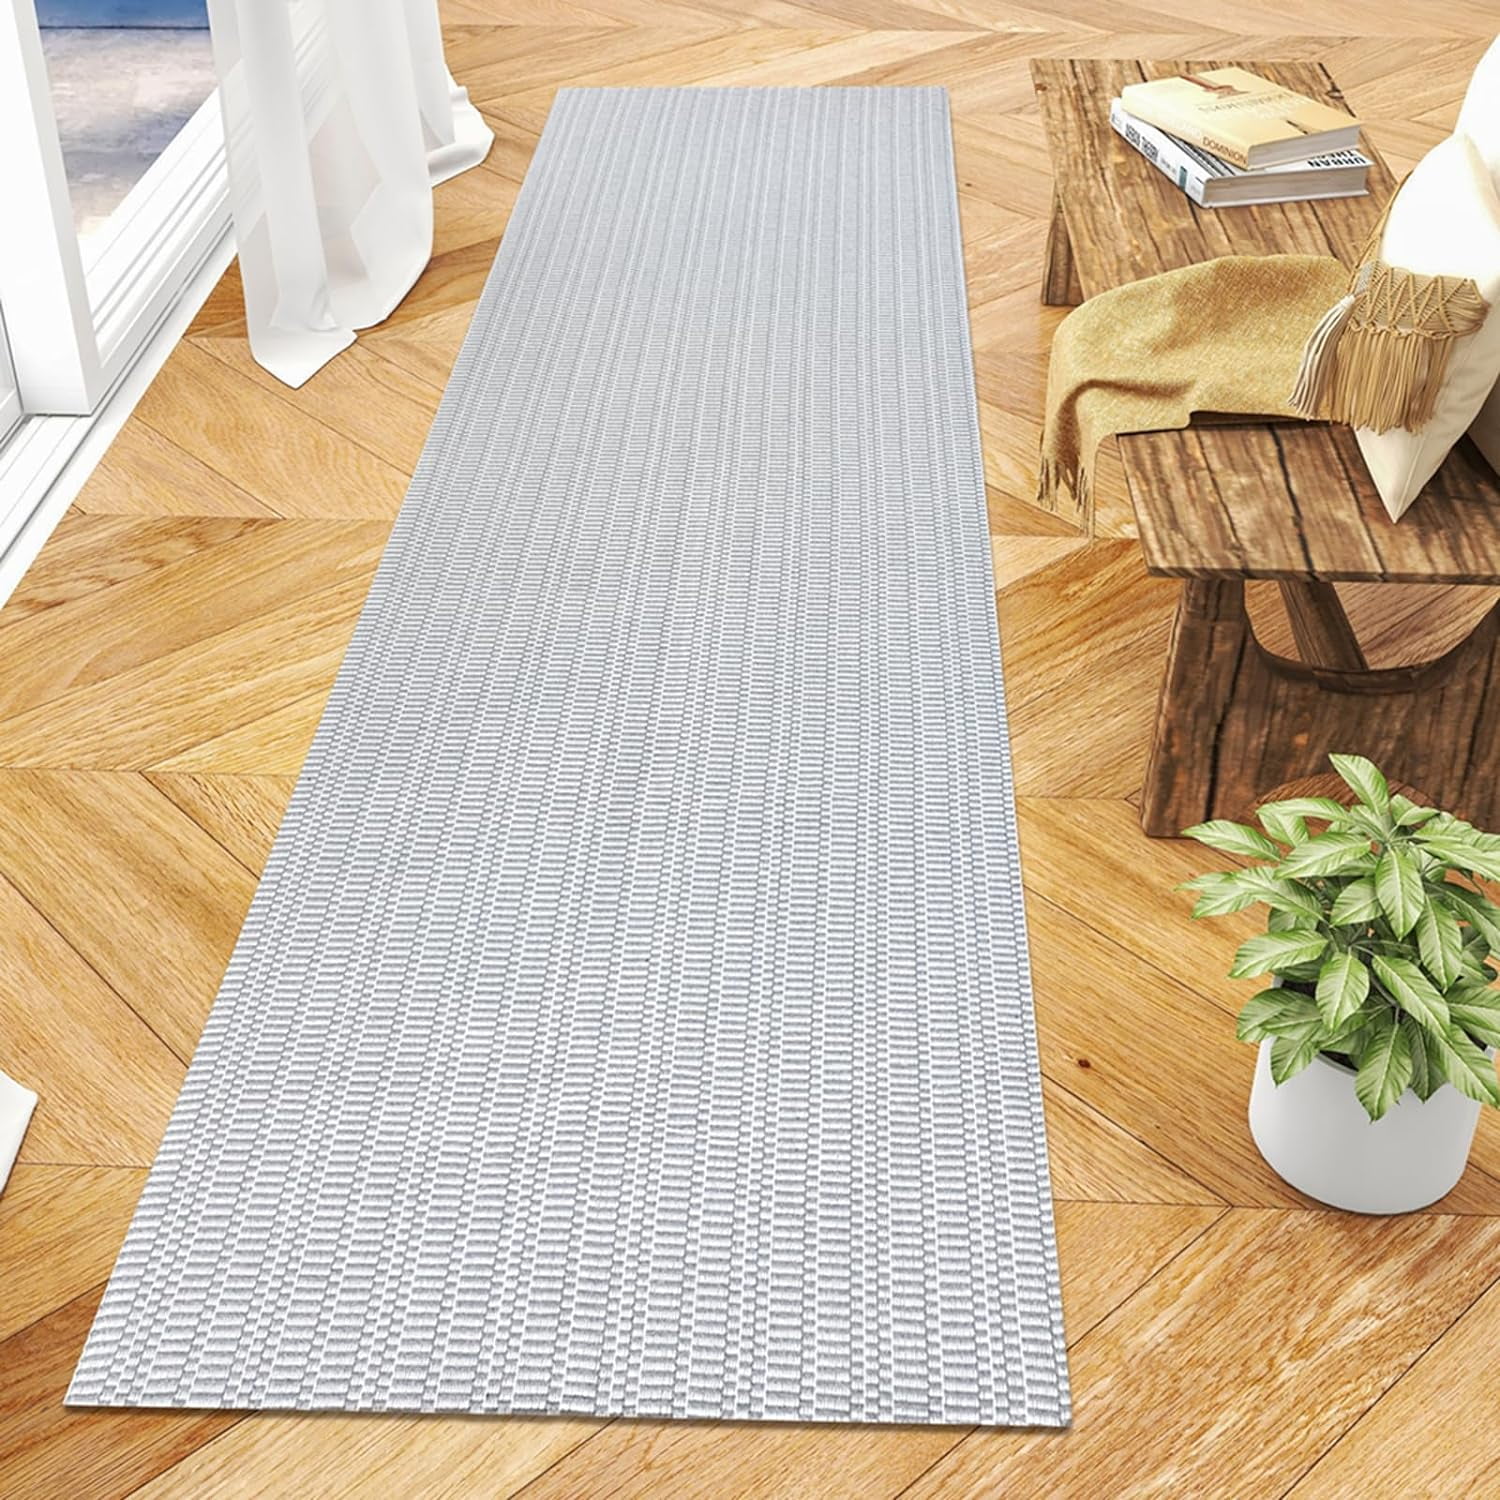 iOhouze Runners for Hallways 2x6 ft Washable Hall Carpet Runner Rubber  Backing Kitchen Rug Entryway Runner Rugs, Light Grey 